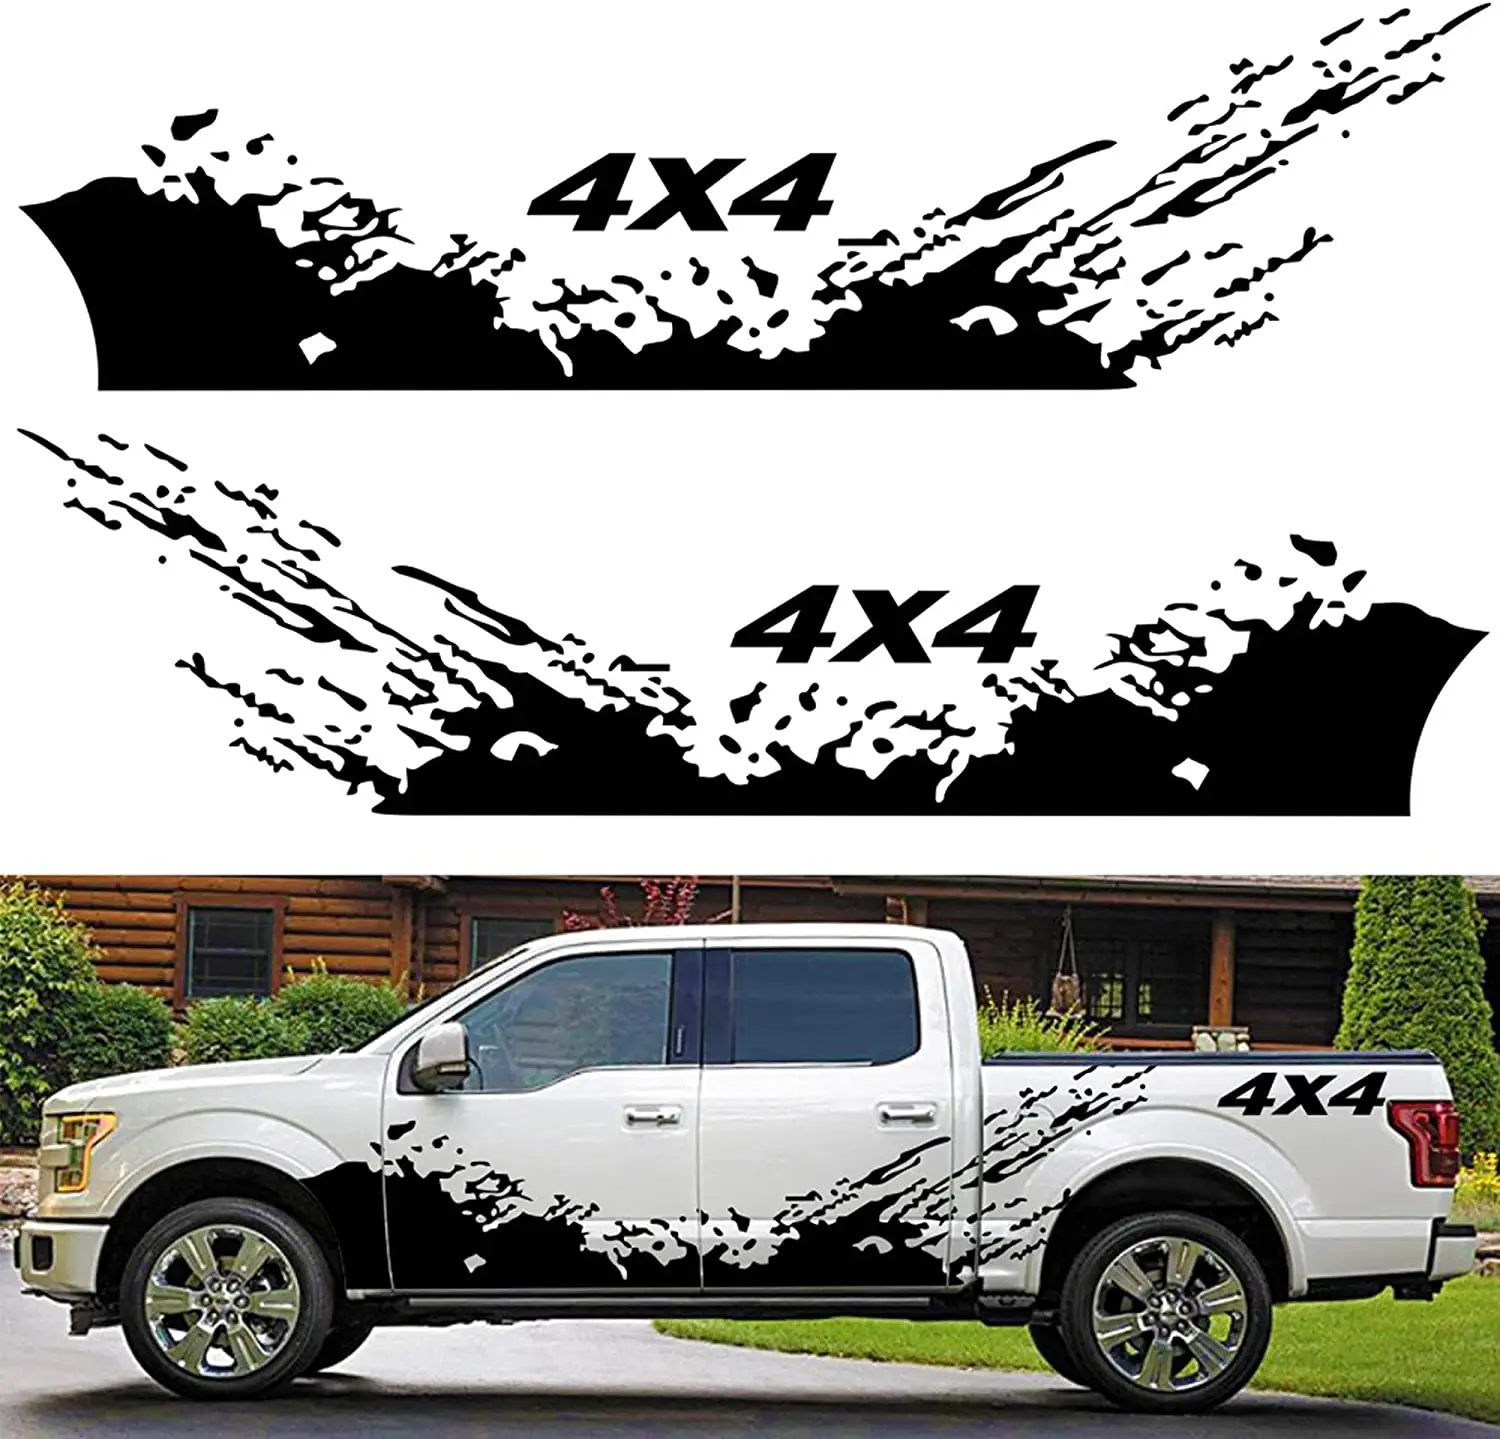 

Fochutech Truck Car Stickers Large Car Side Decals for Truck Pickup SUV Racing Stripes Car Stickers 4x4 Waves Graphics